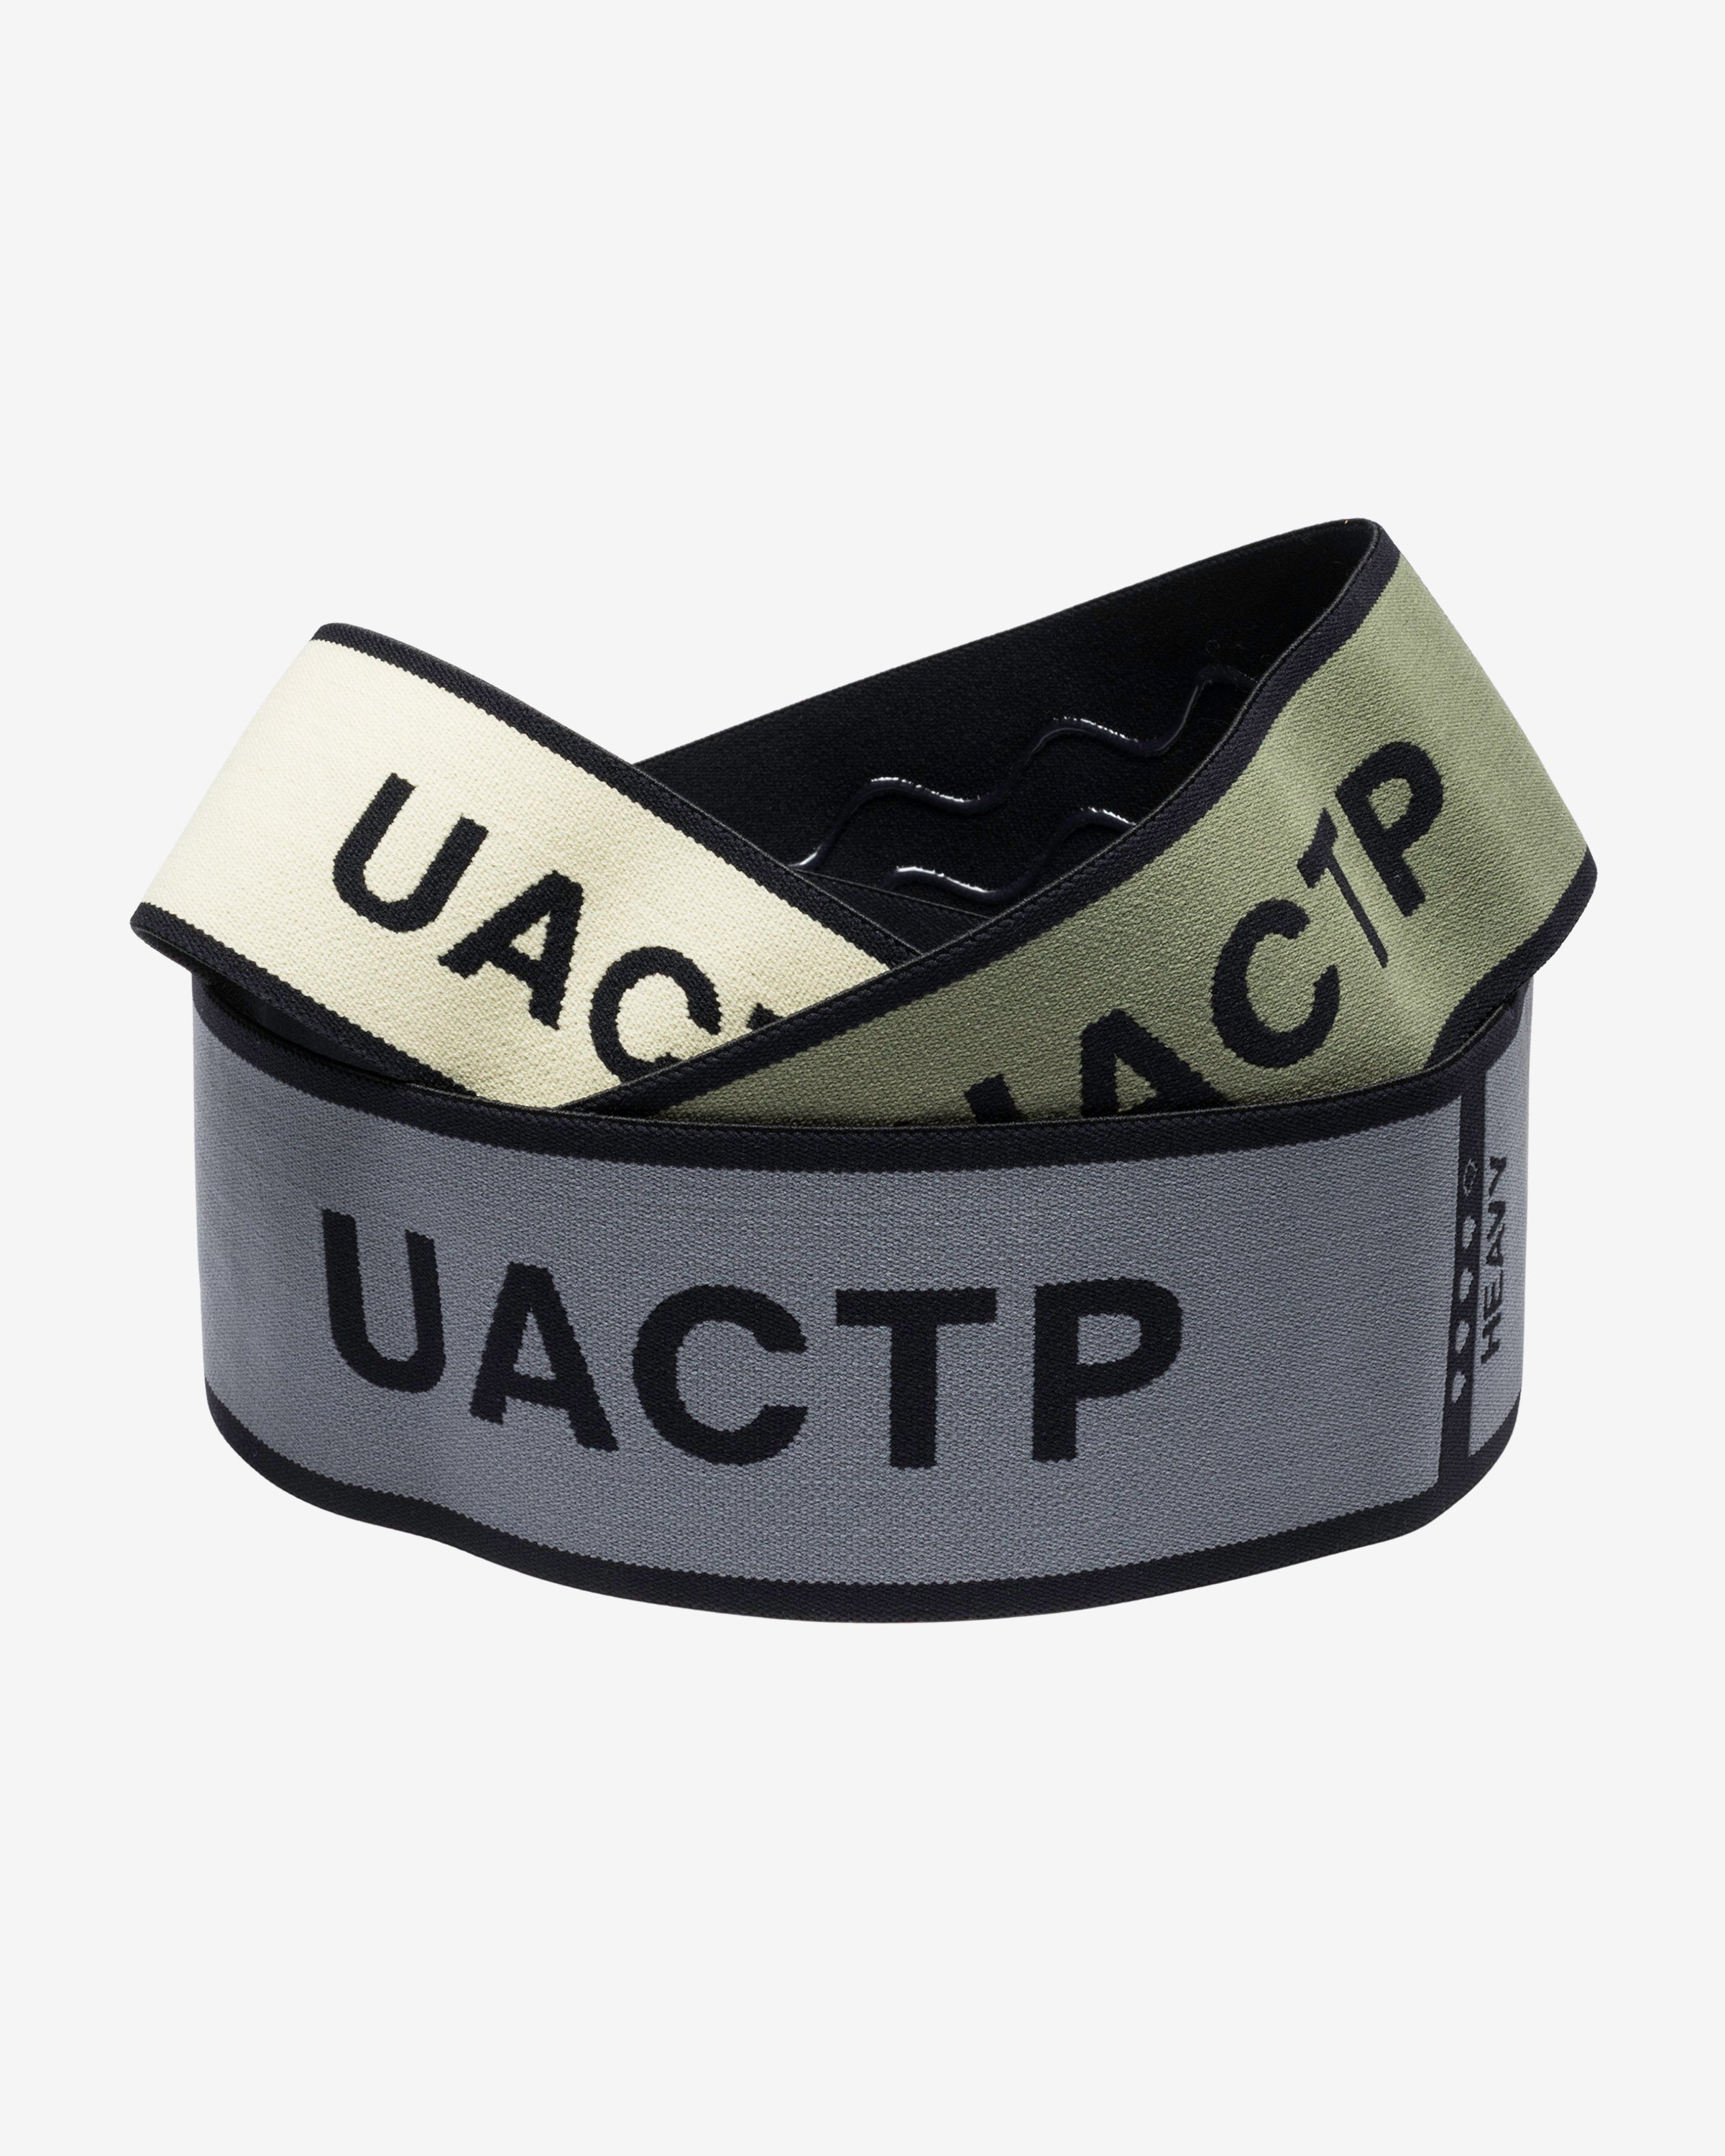 UACTP FULL FUNCTION FABRIC RESISTANCE BANDS